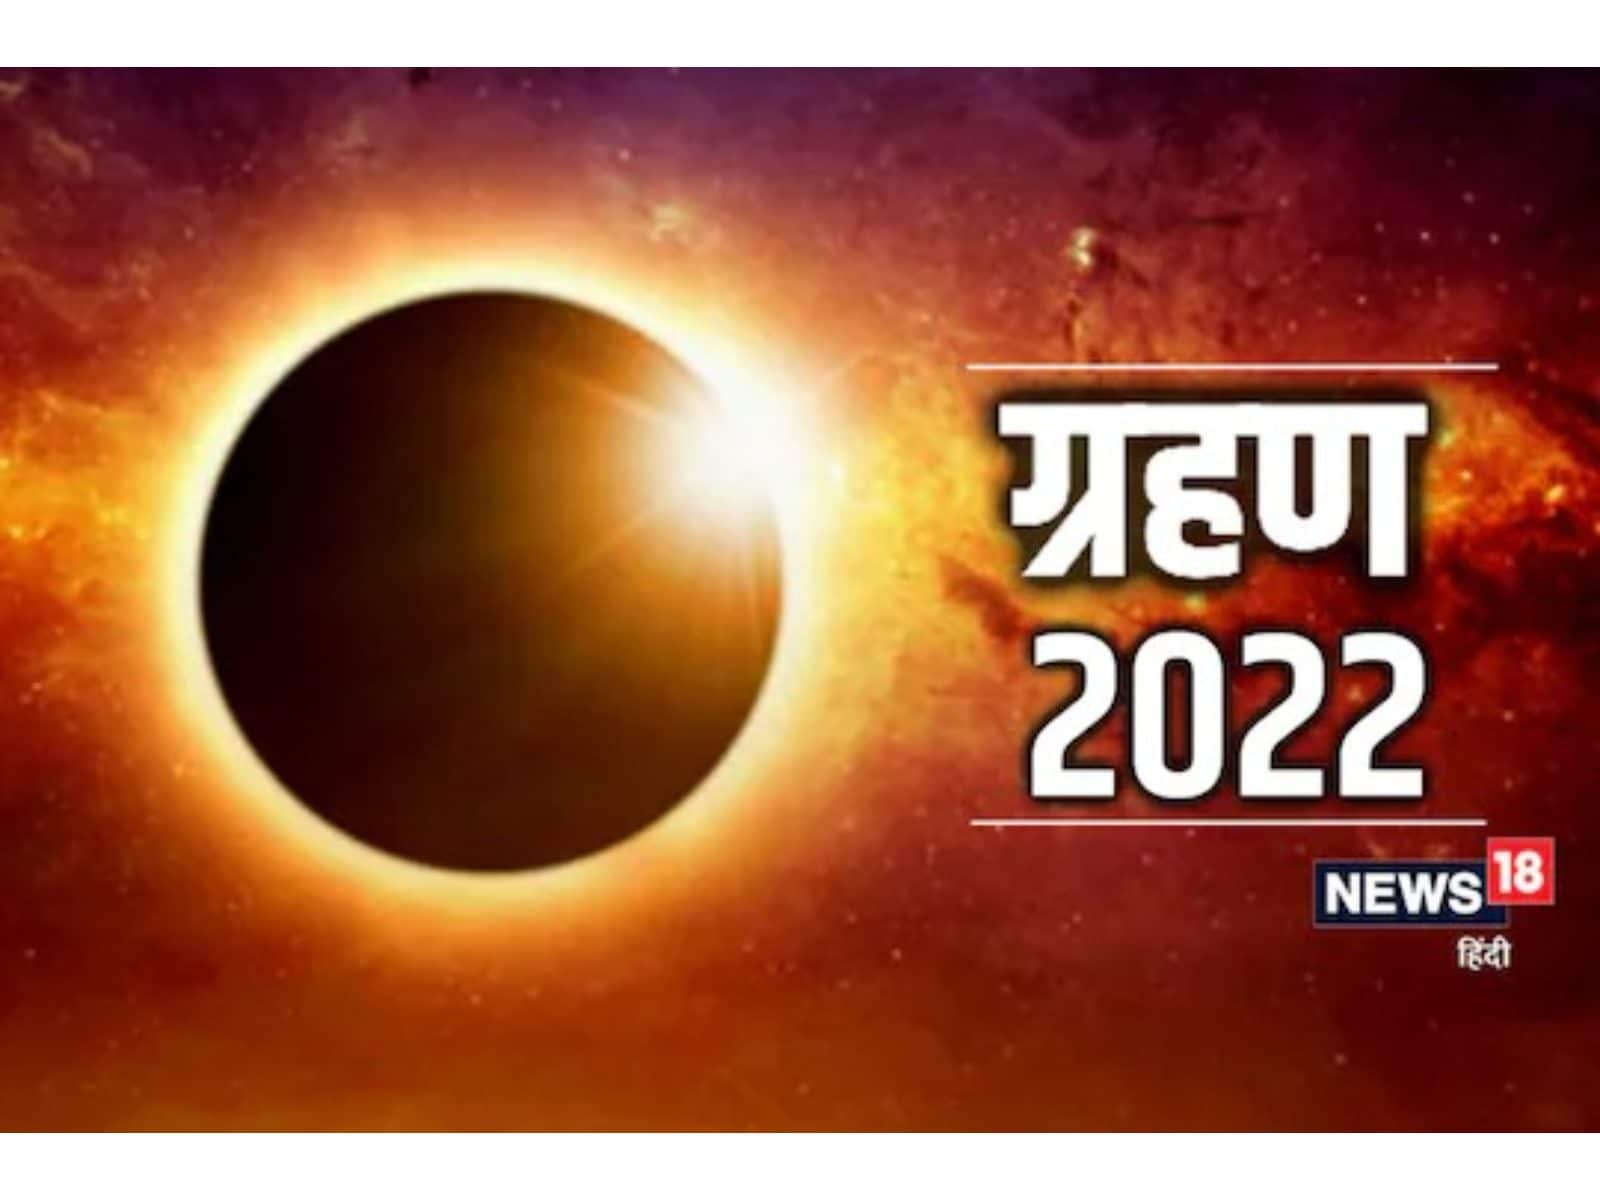 2022 To Have 4 Solar, Lunar Eclipses. Here's All You Need To Know About Date, Time